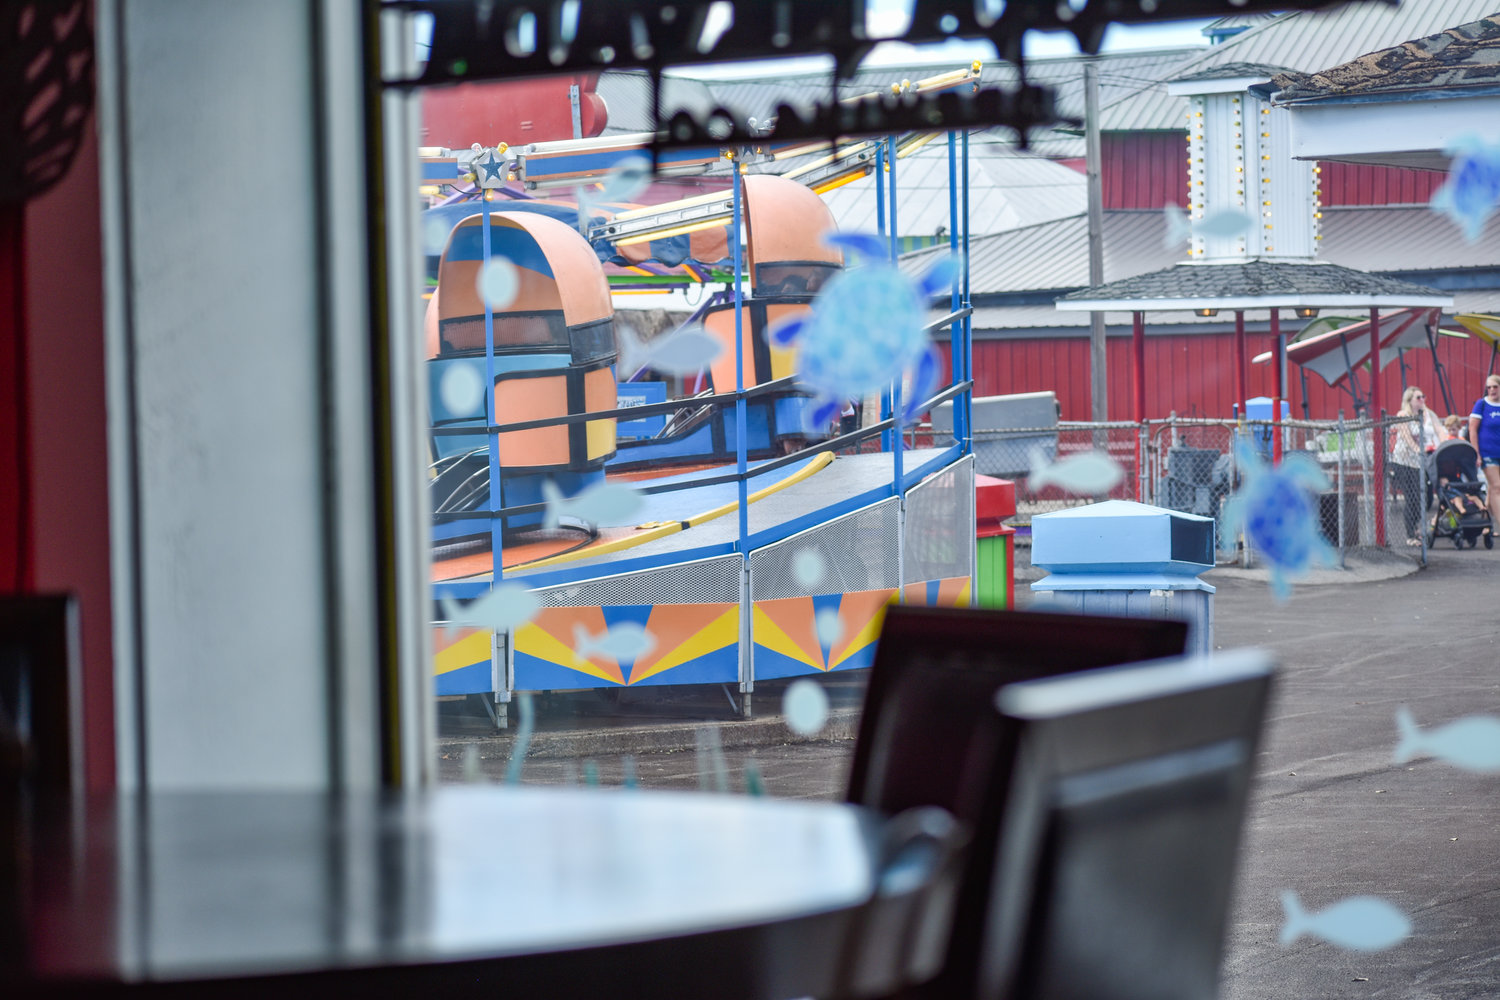 Rides at the Sylvan Beach Amusement Park can be seen next door while dining at the Crazy Clam.